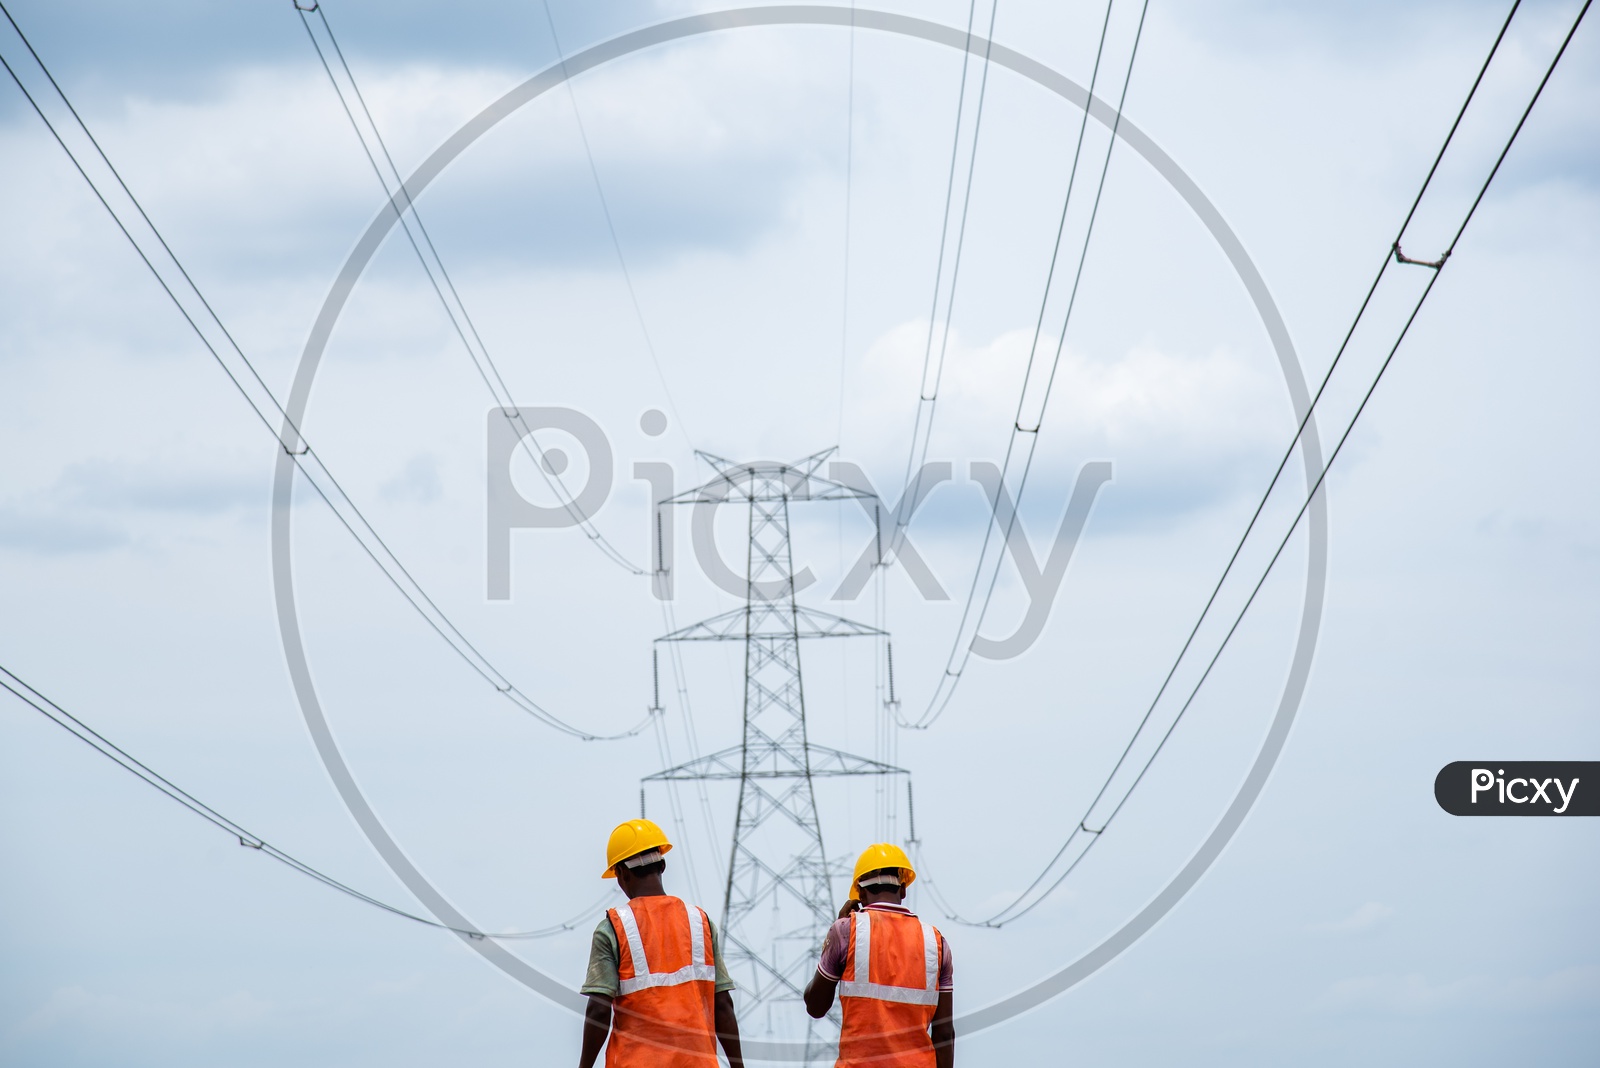 Construction Workers under High Voltage Electricity Wires.